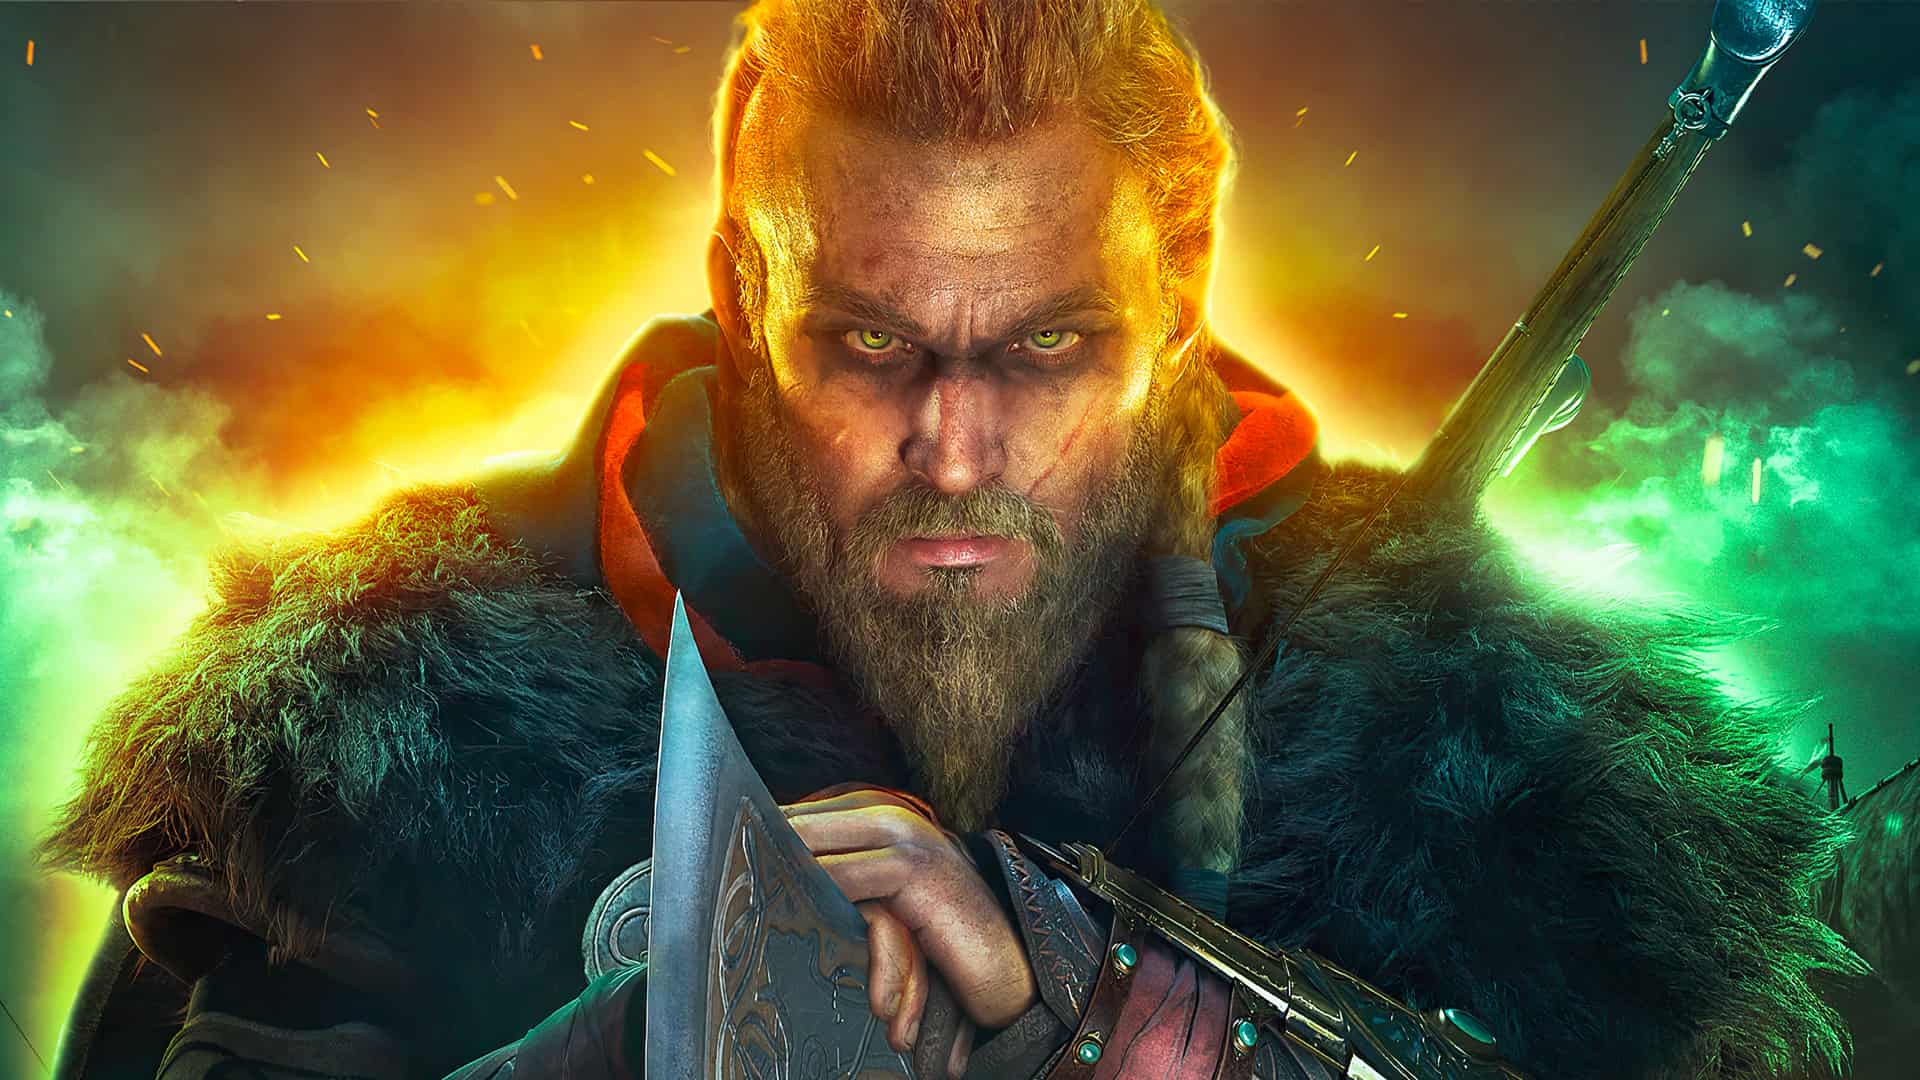 Love Vikings? Top 18 Viking Games to Check Out in 2023